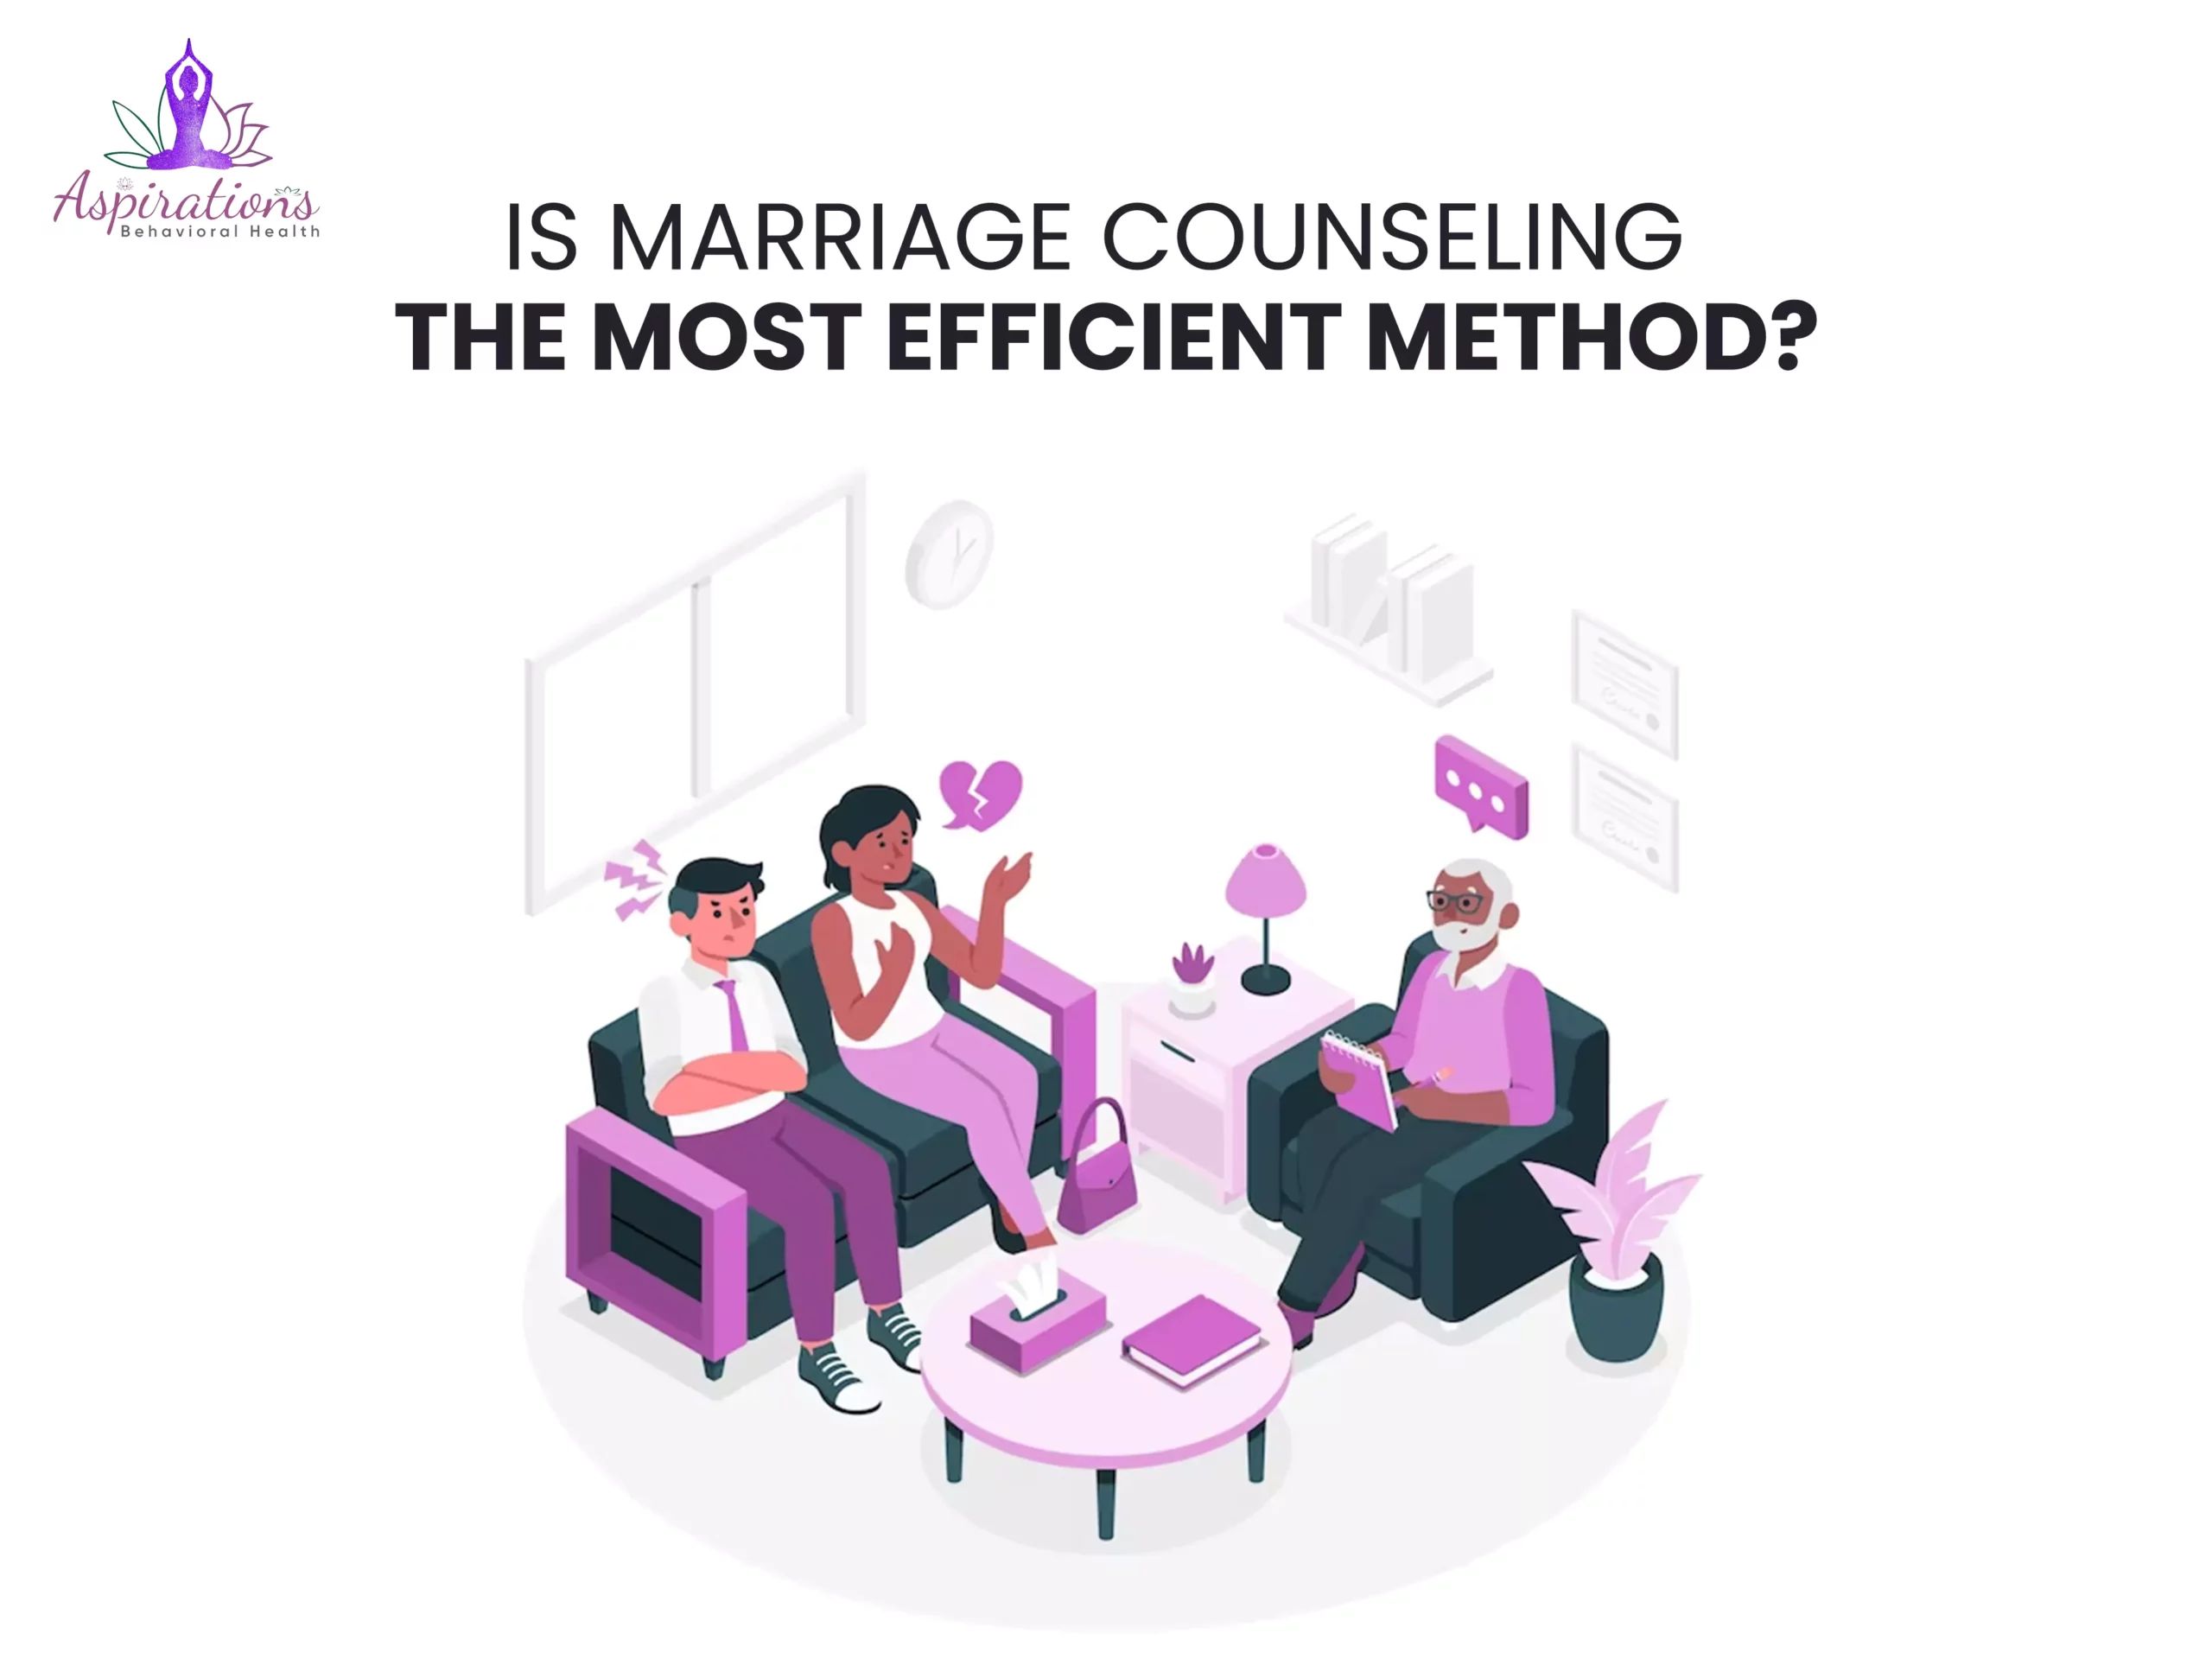 Is Marriage Counseling the Most Efficient Method?